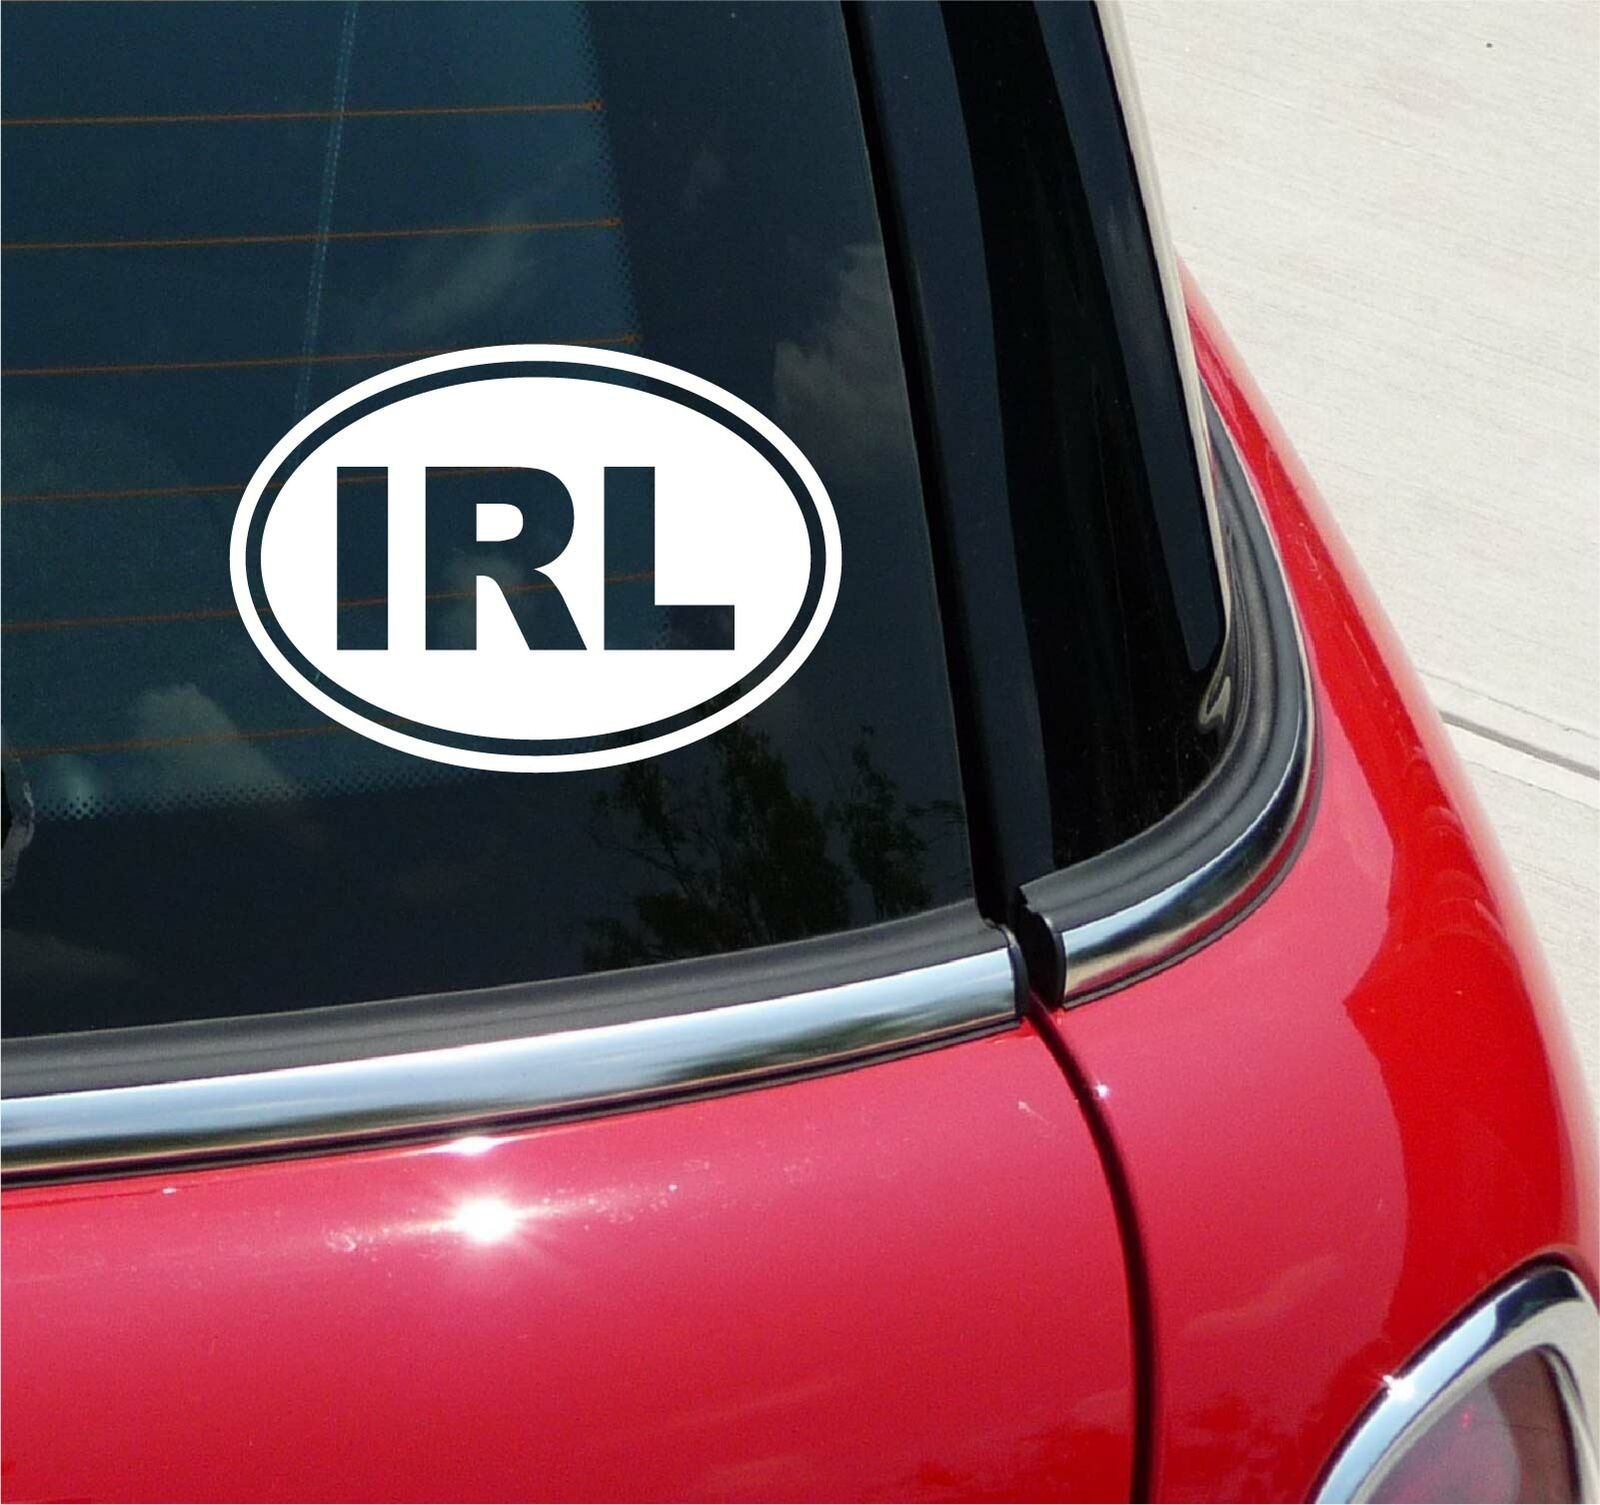 Euro IRL Ireland Country Code Max 67% OFF Limited time sale Decal Car NOT Sticker Tw Wall Oval